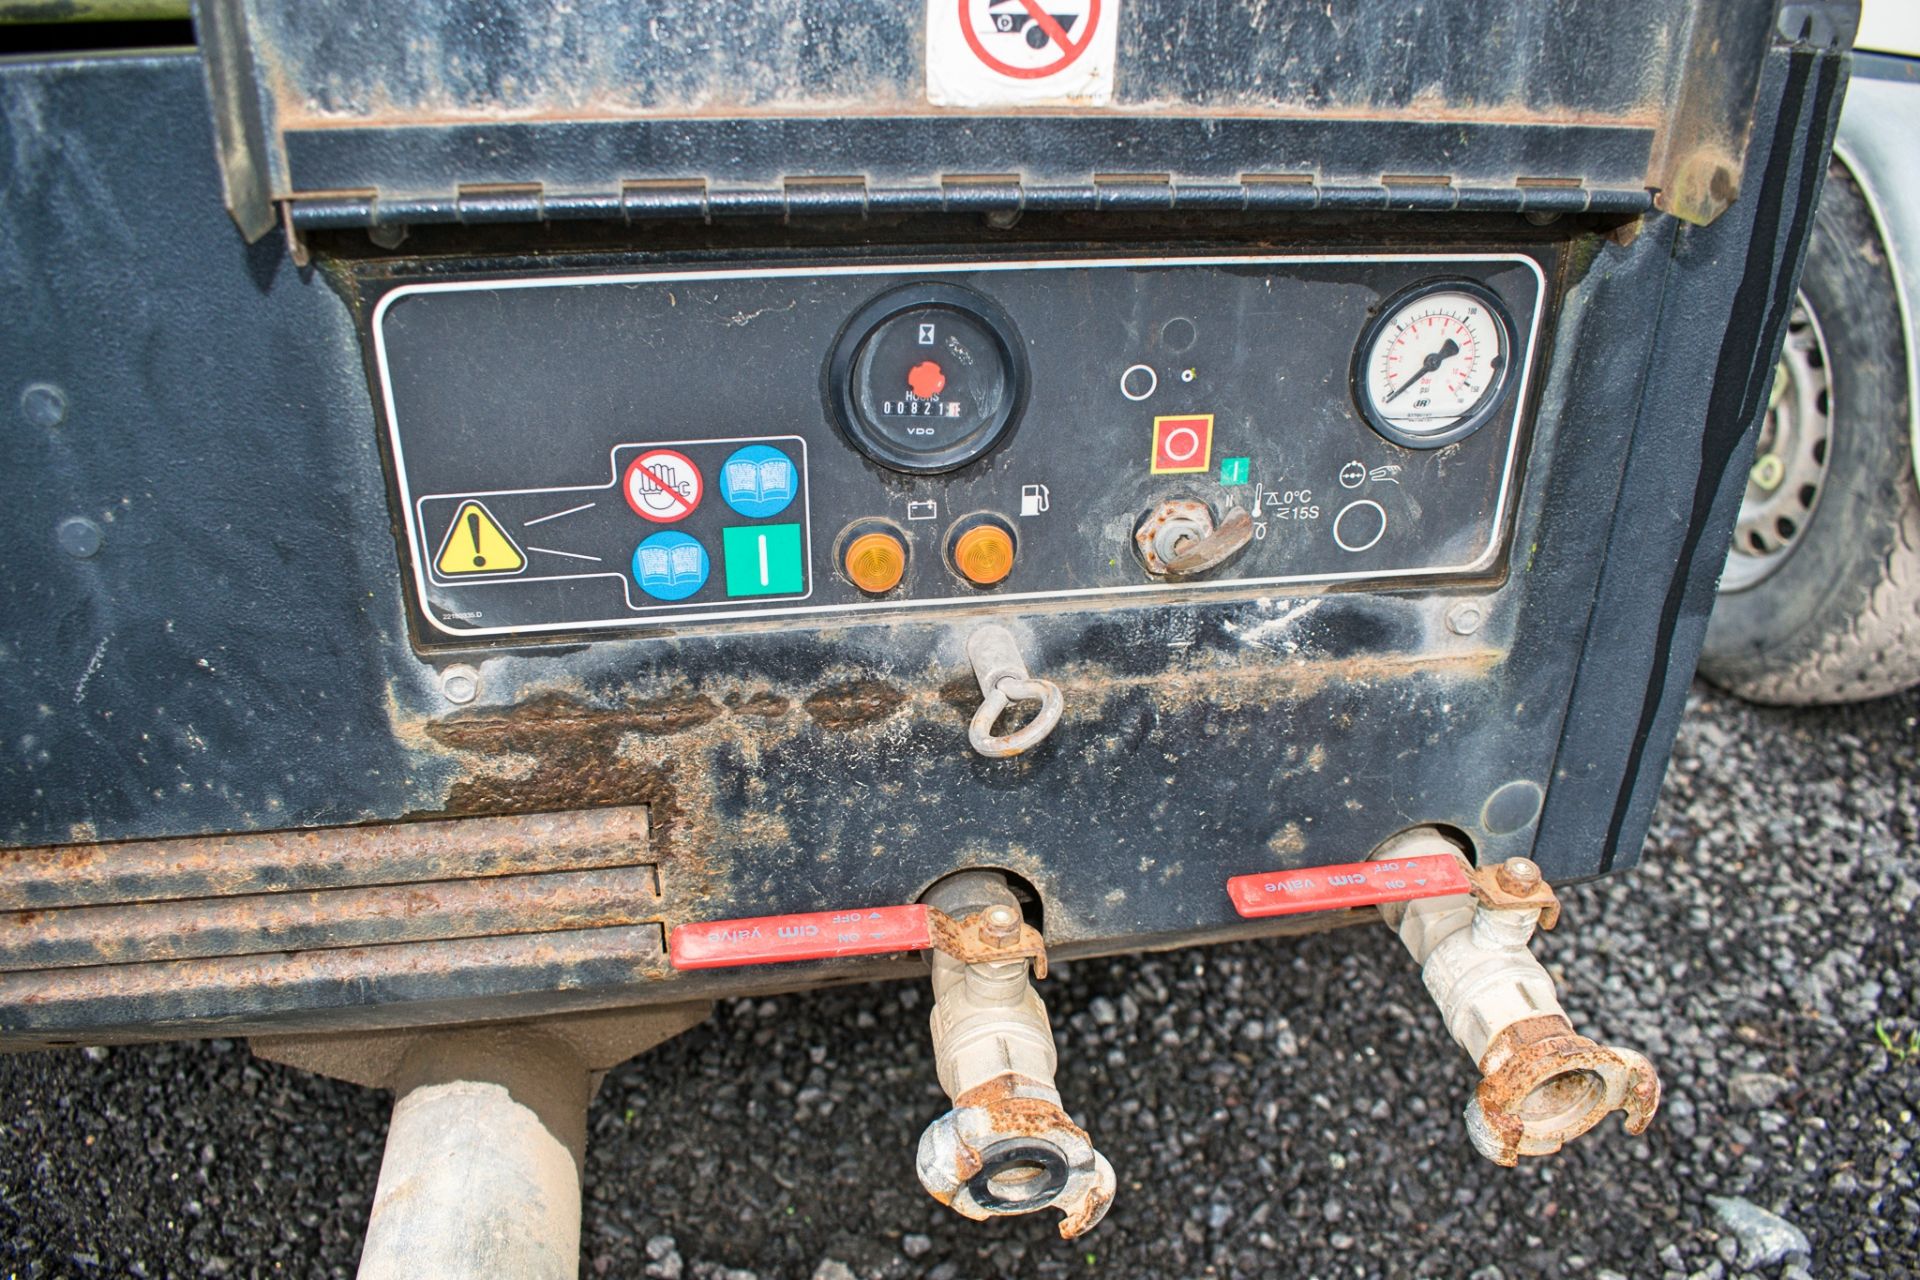 Ingersoll Rand 741 diesel driven mobile air compressor Year: 2012 S/N: 431491 Recorded Hours: 821 - Image 4 of 4